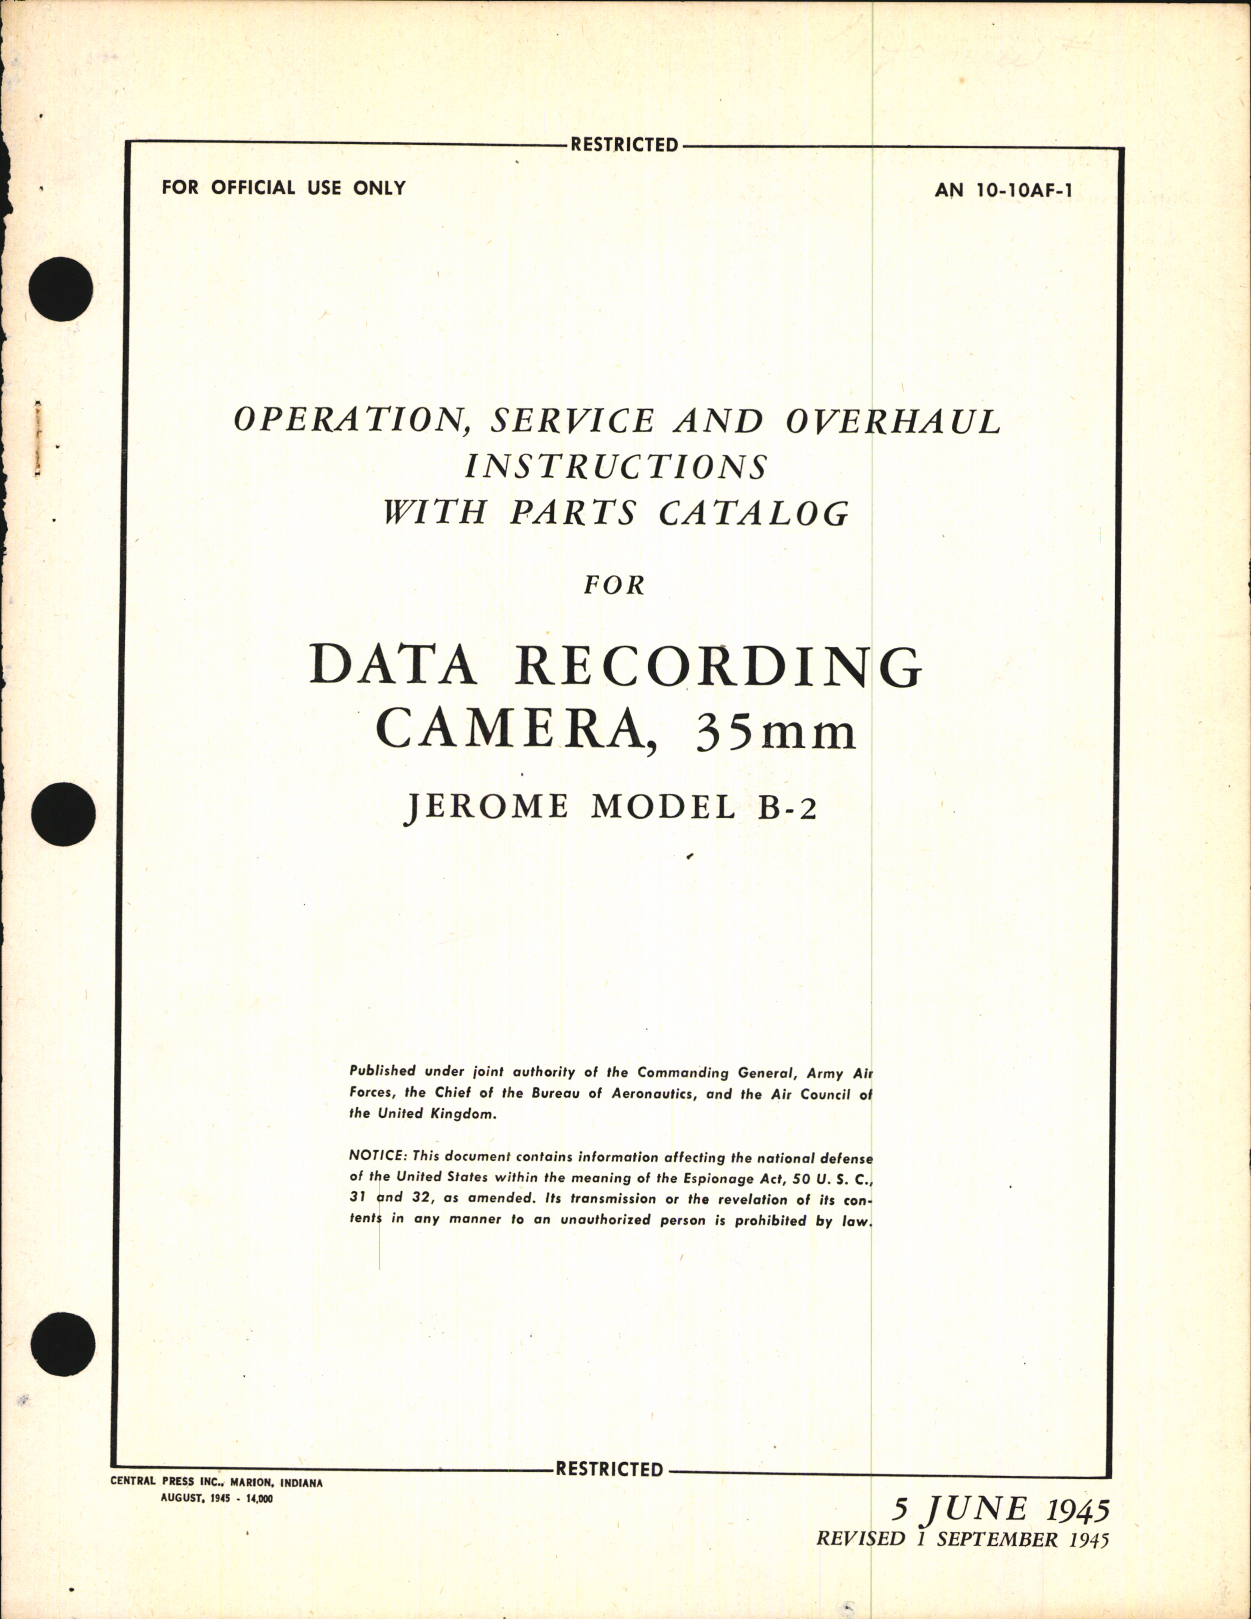 Sample page 1 from AirCorps Library document: Operation, Service, & Overhaul Instructions with Parts Catalog for Data Recording Camera Model B-2